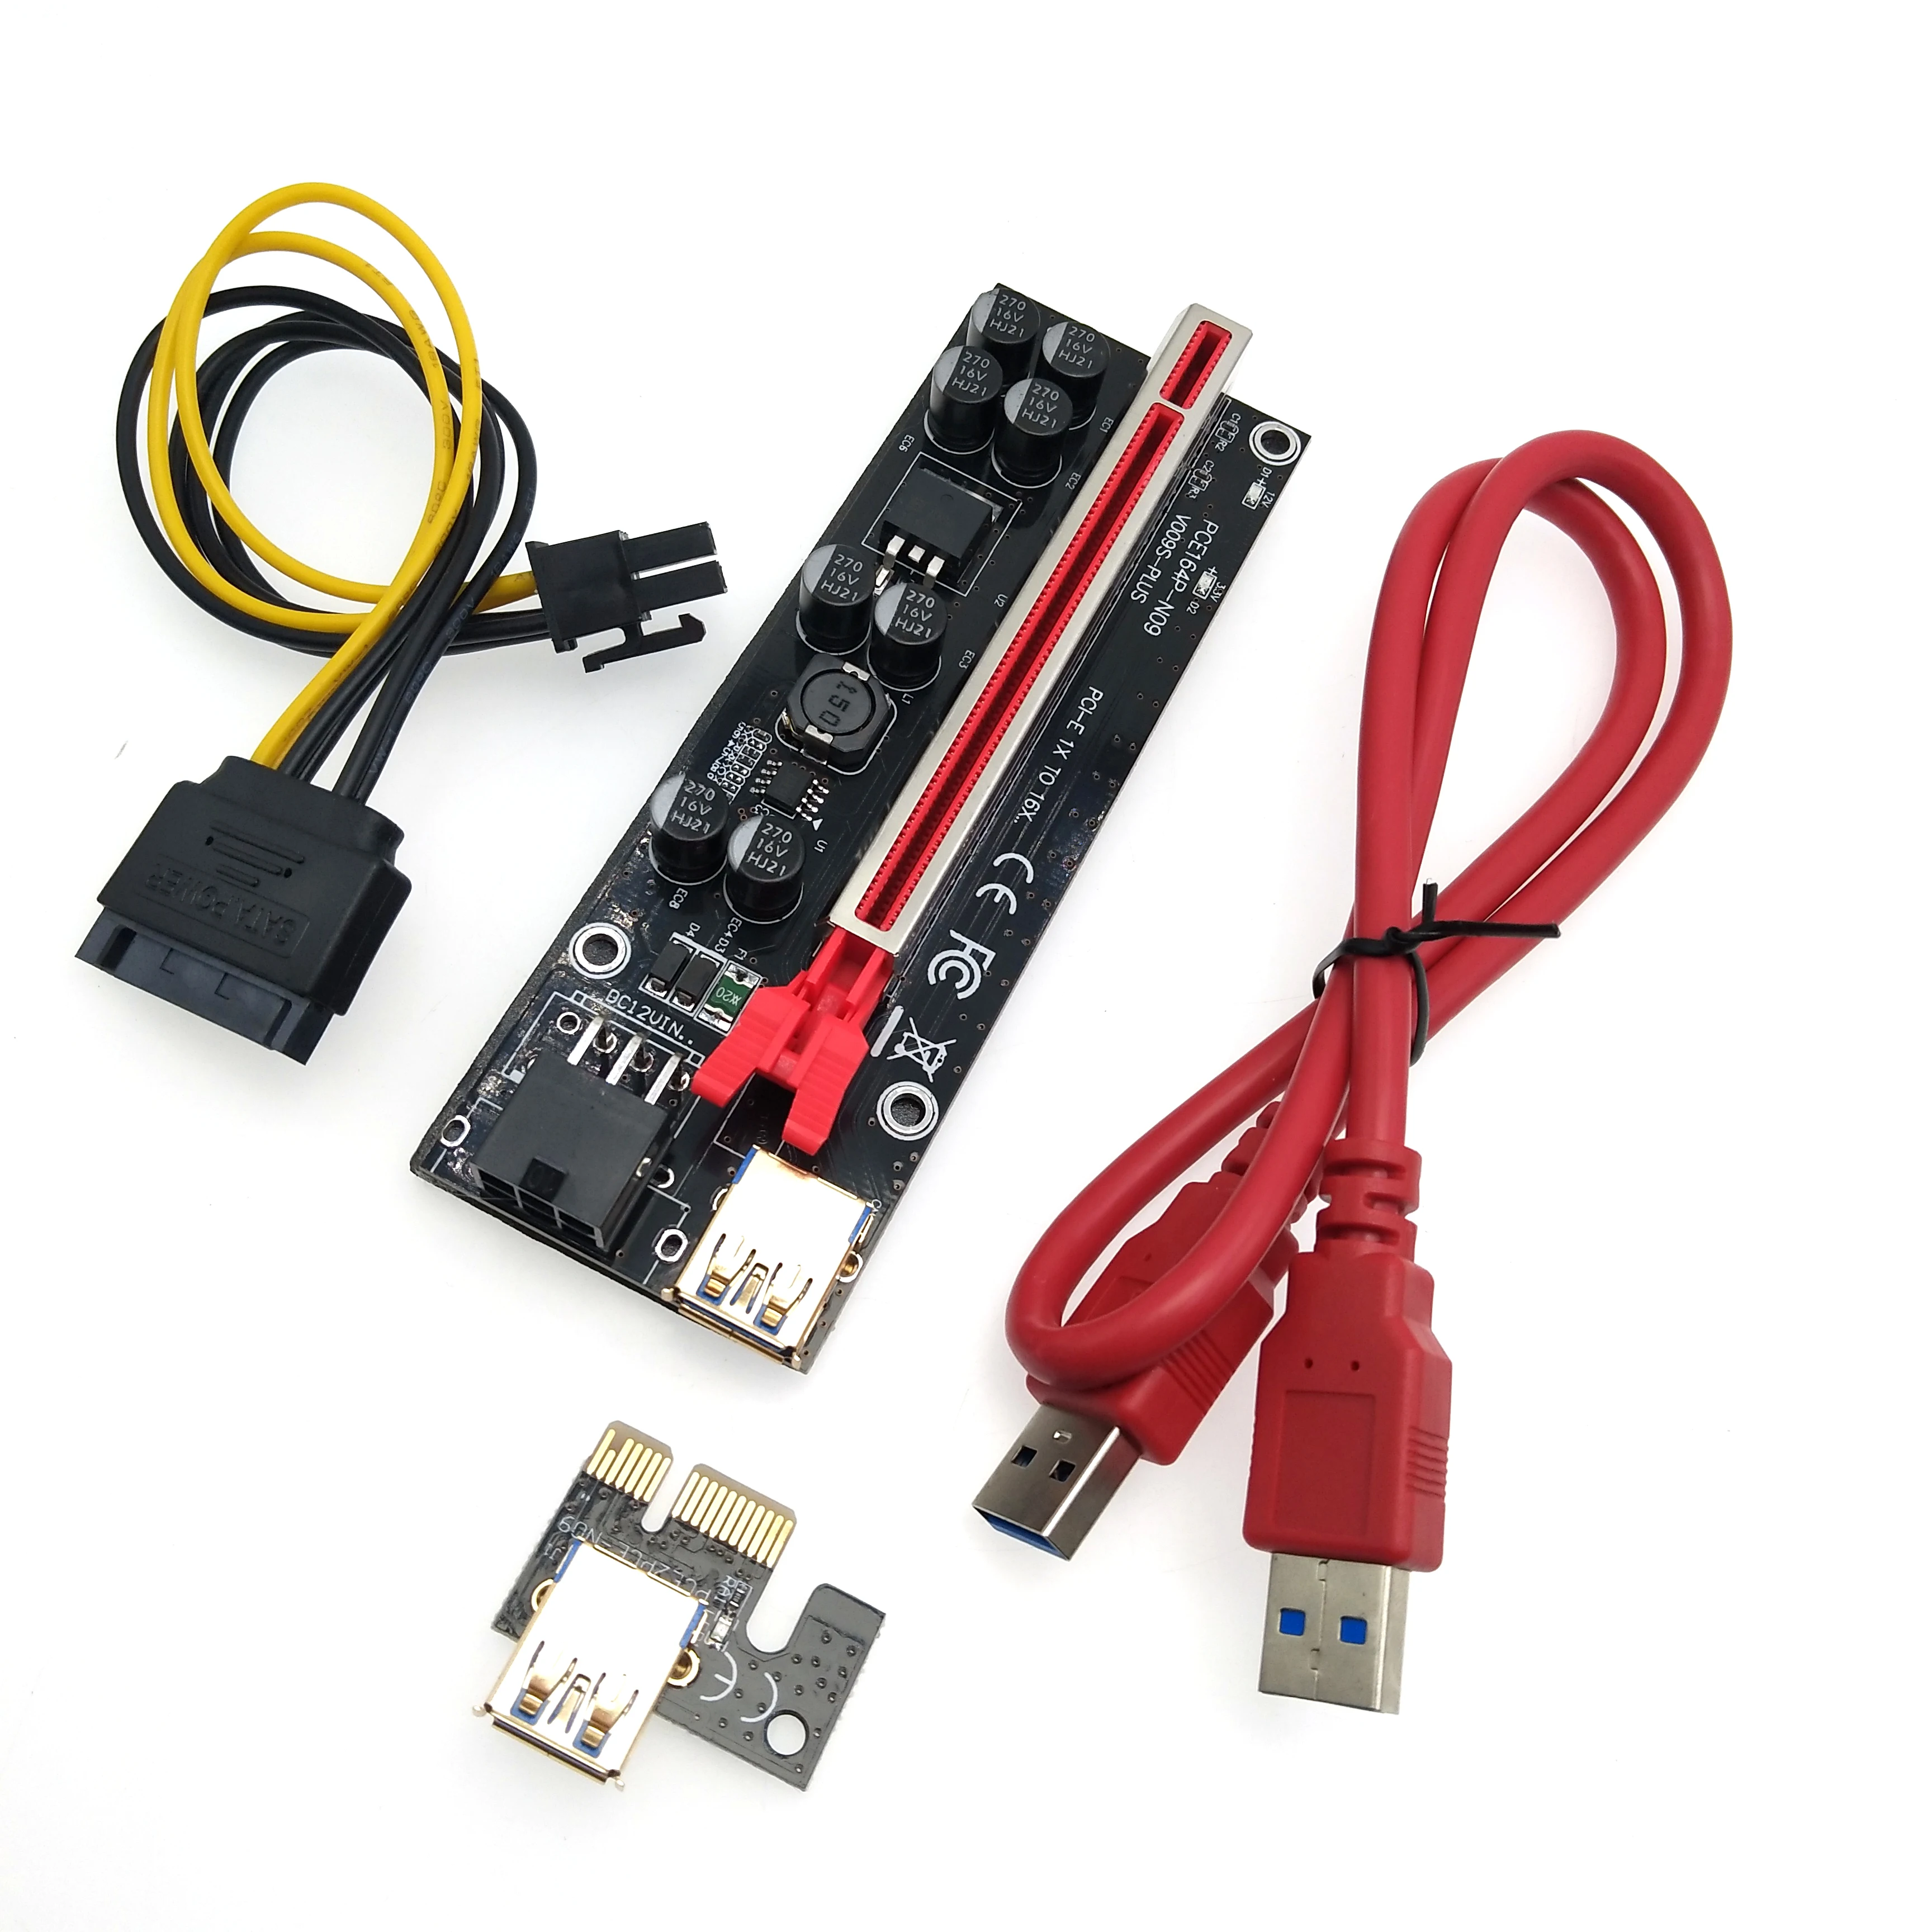 

Newest Ver 009s Pci-e 1x To 16x Ler Riser 009 Card Extender Pci Express Adapter Usb 3.0 Cable Power